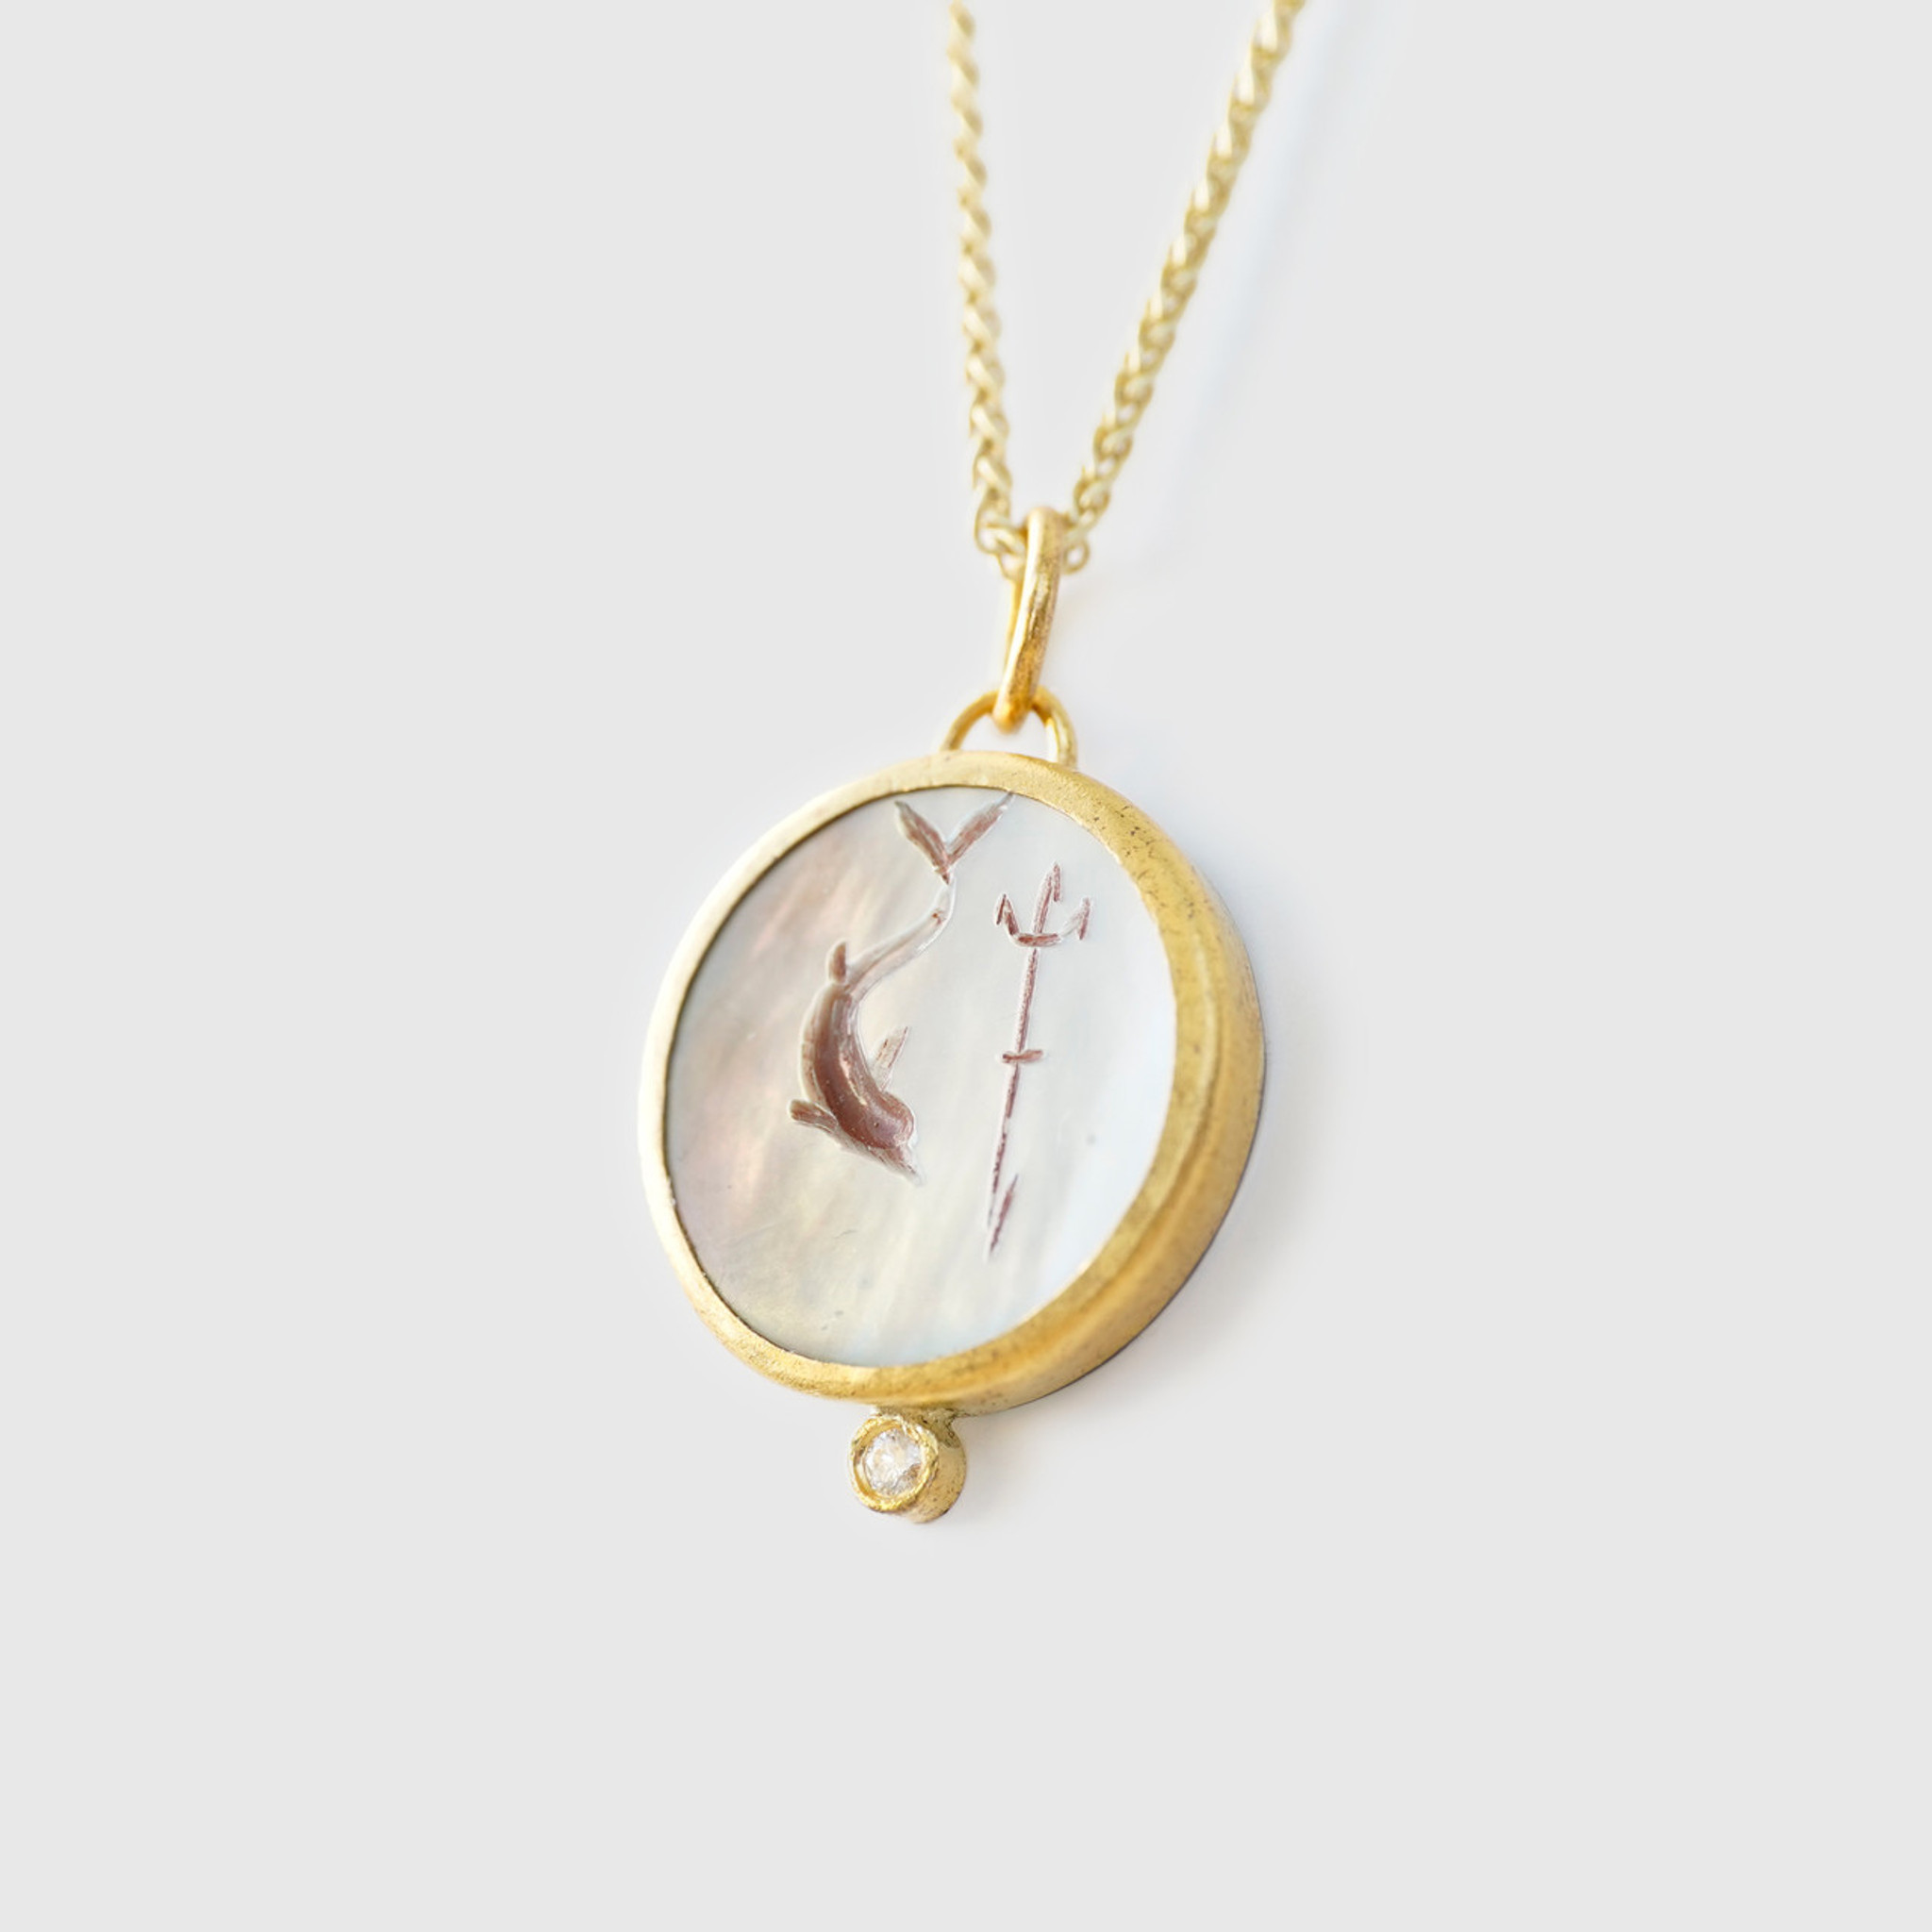 Prehistoric Works Poseidon, Arrow & Dolphin Intaglio Charm Pendant Necklace - 24kt Yellow Gold, Mother of Pearl with Diamond & Silver 